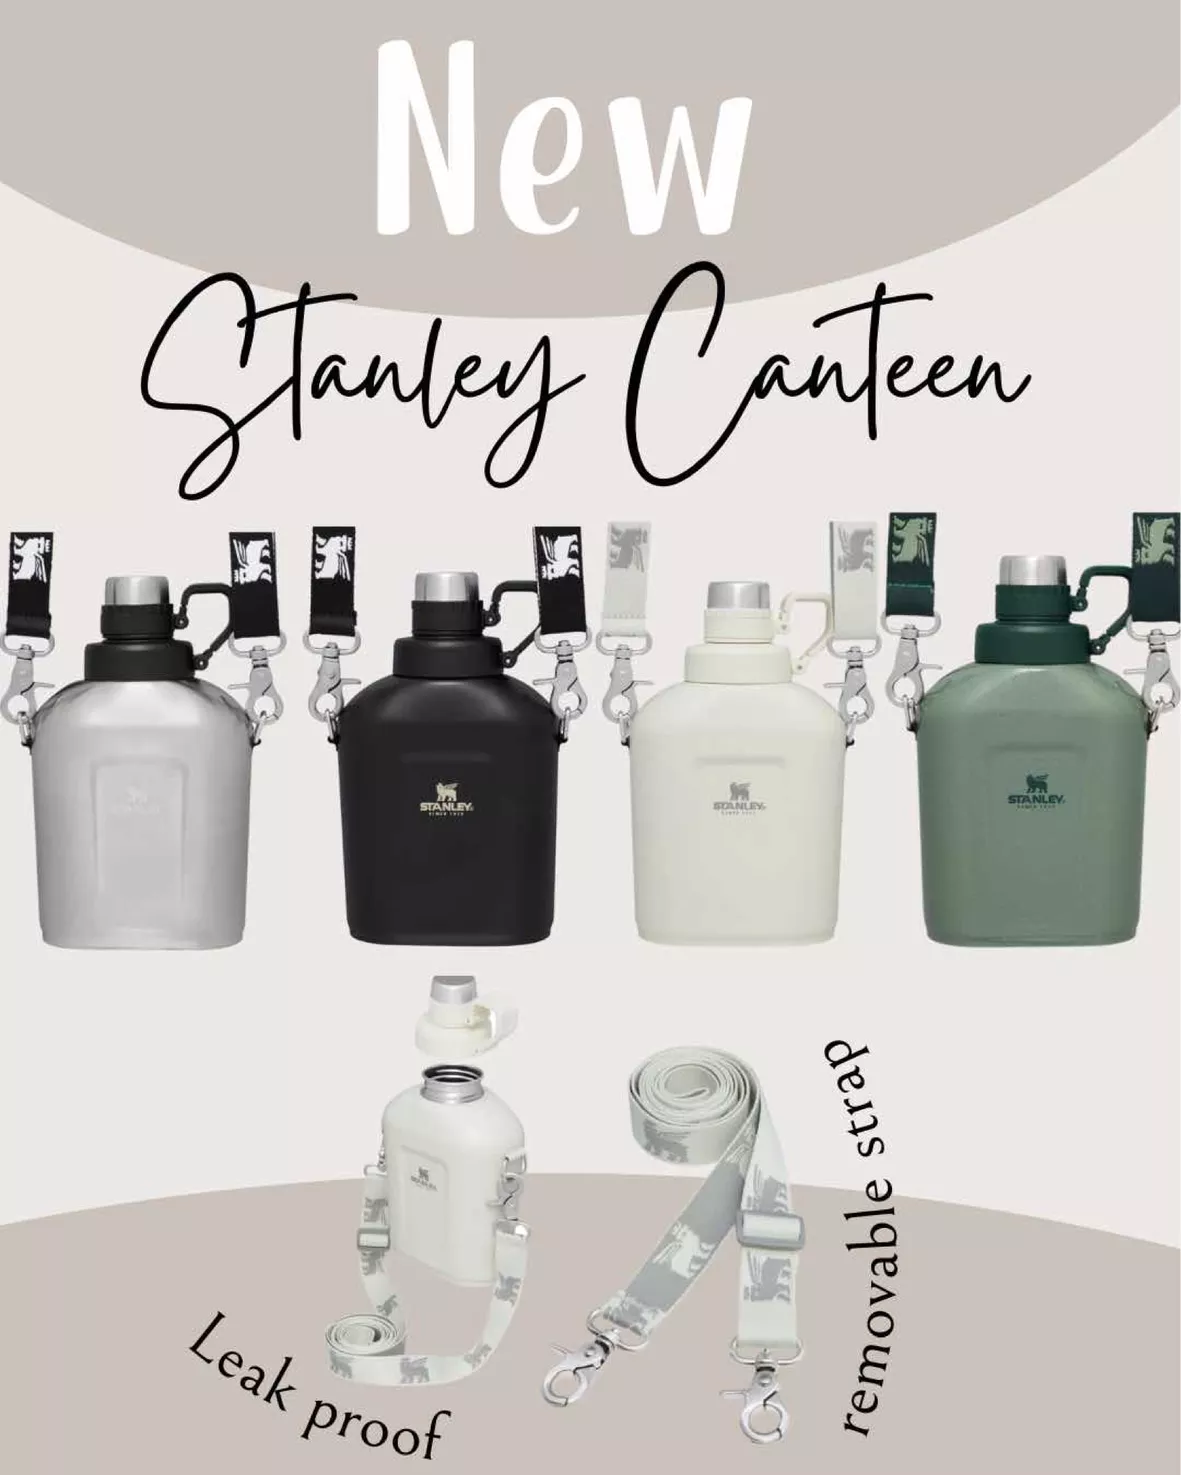 New Arrival: The Legendary Canteen - Stanley